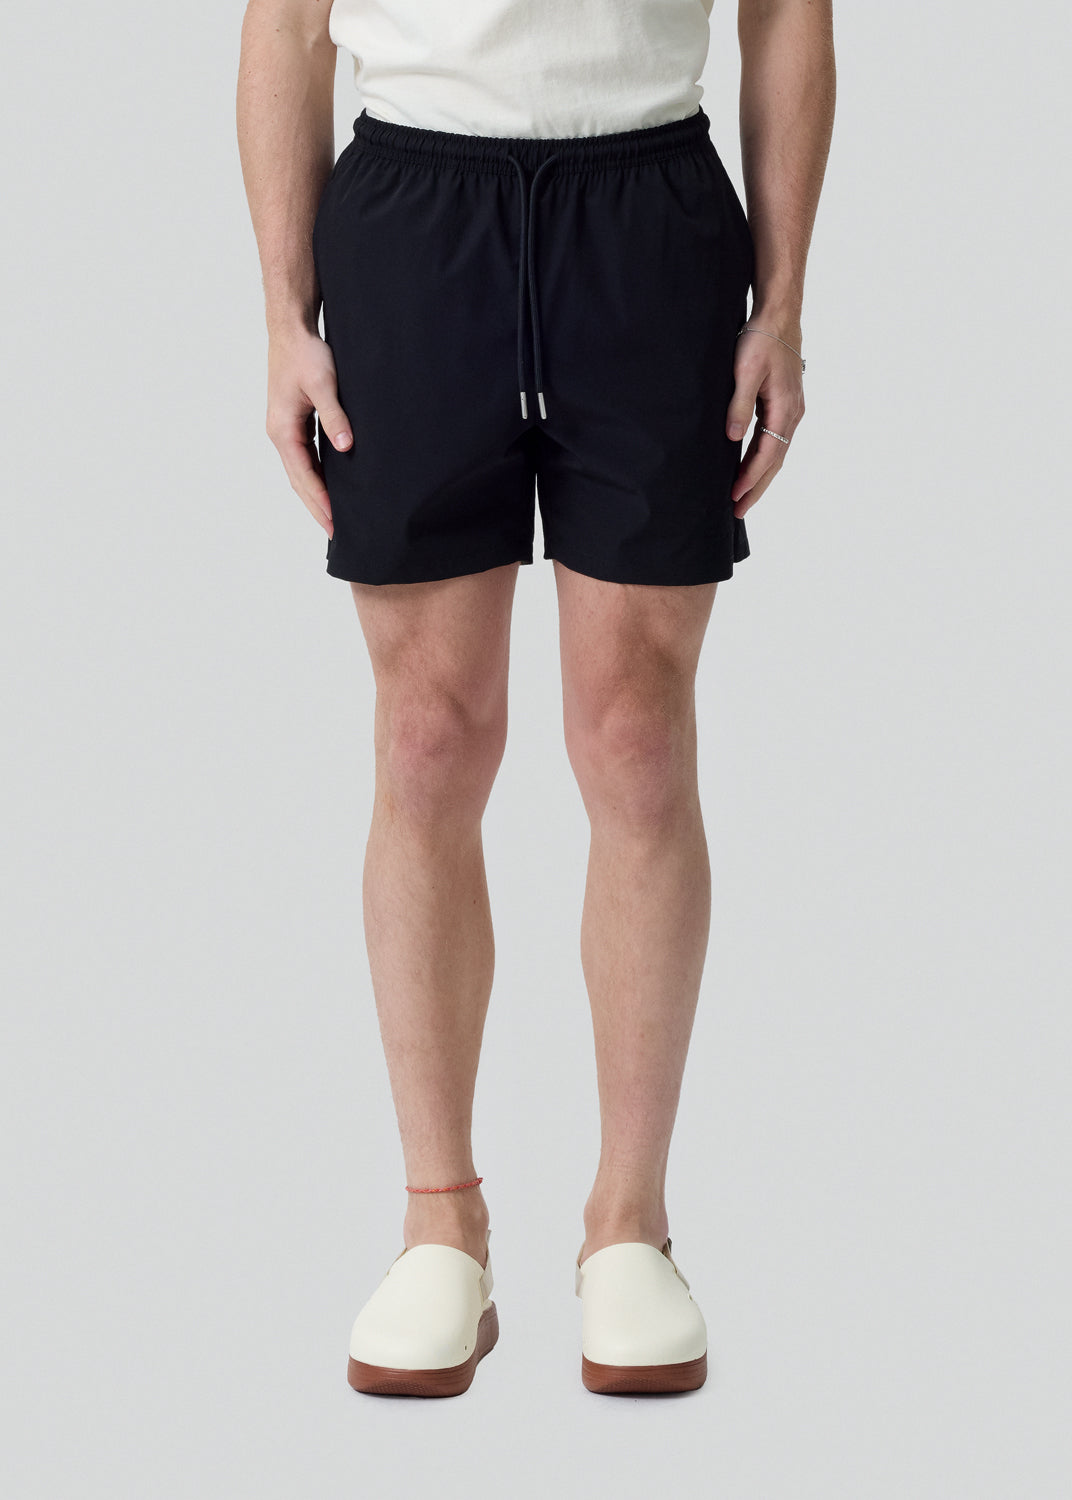 Honor the Gift - Black Hybrid Shorts | 1032 SPACE